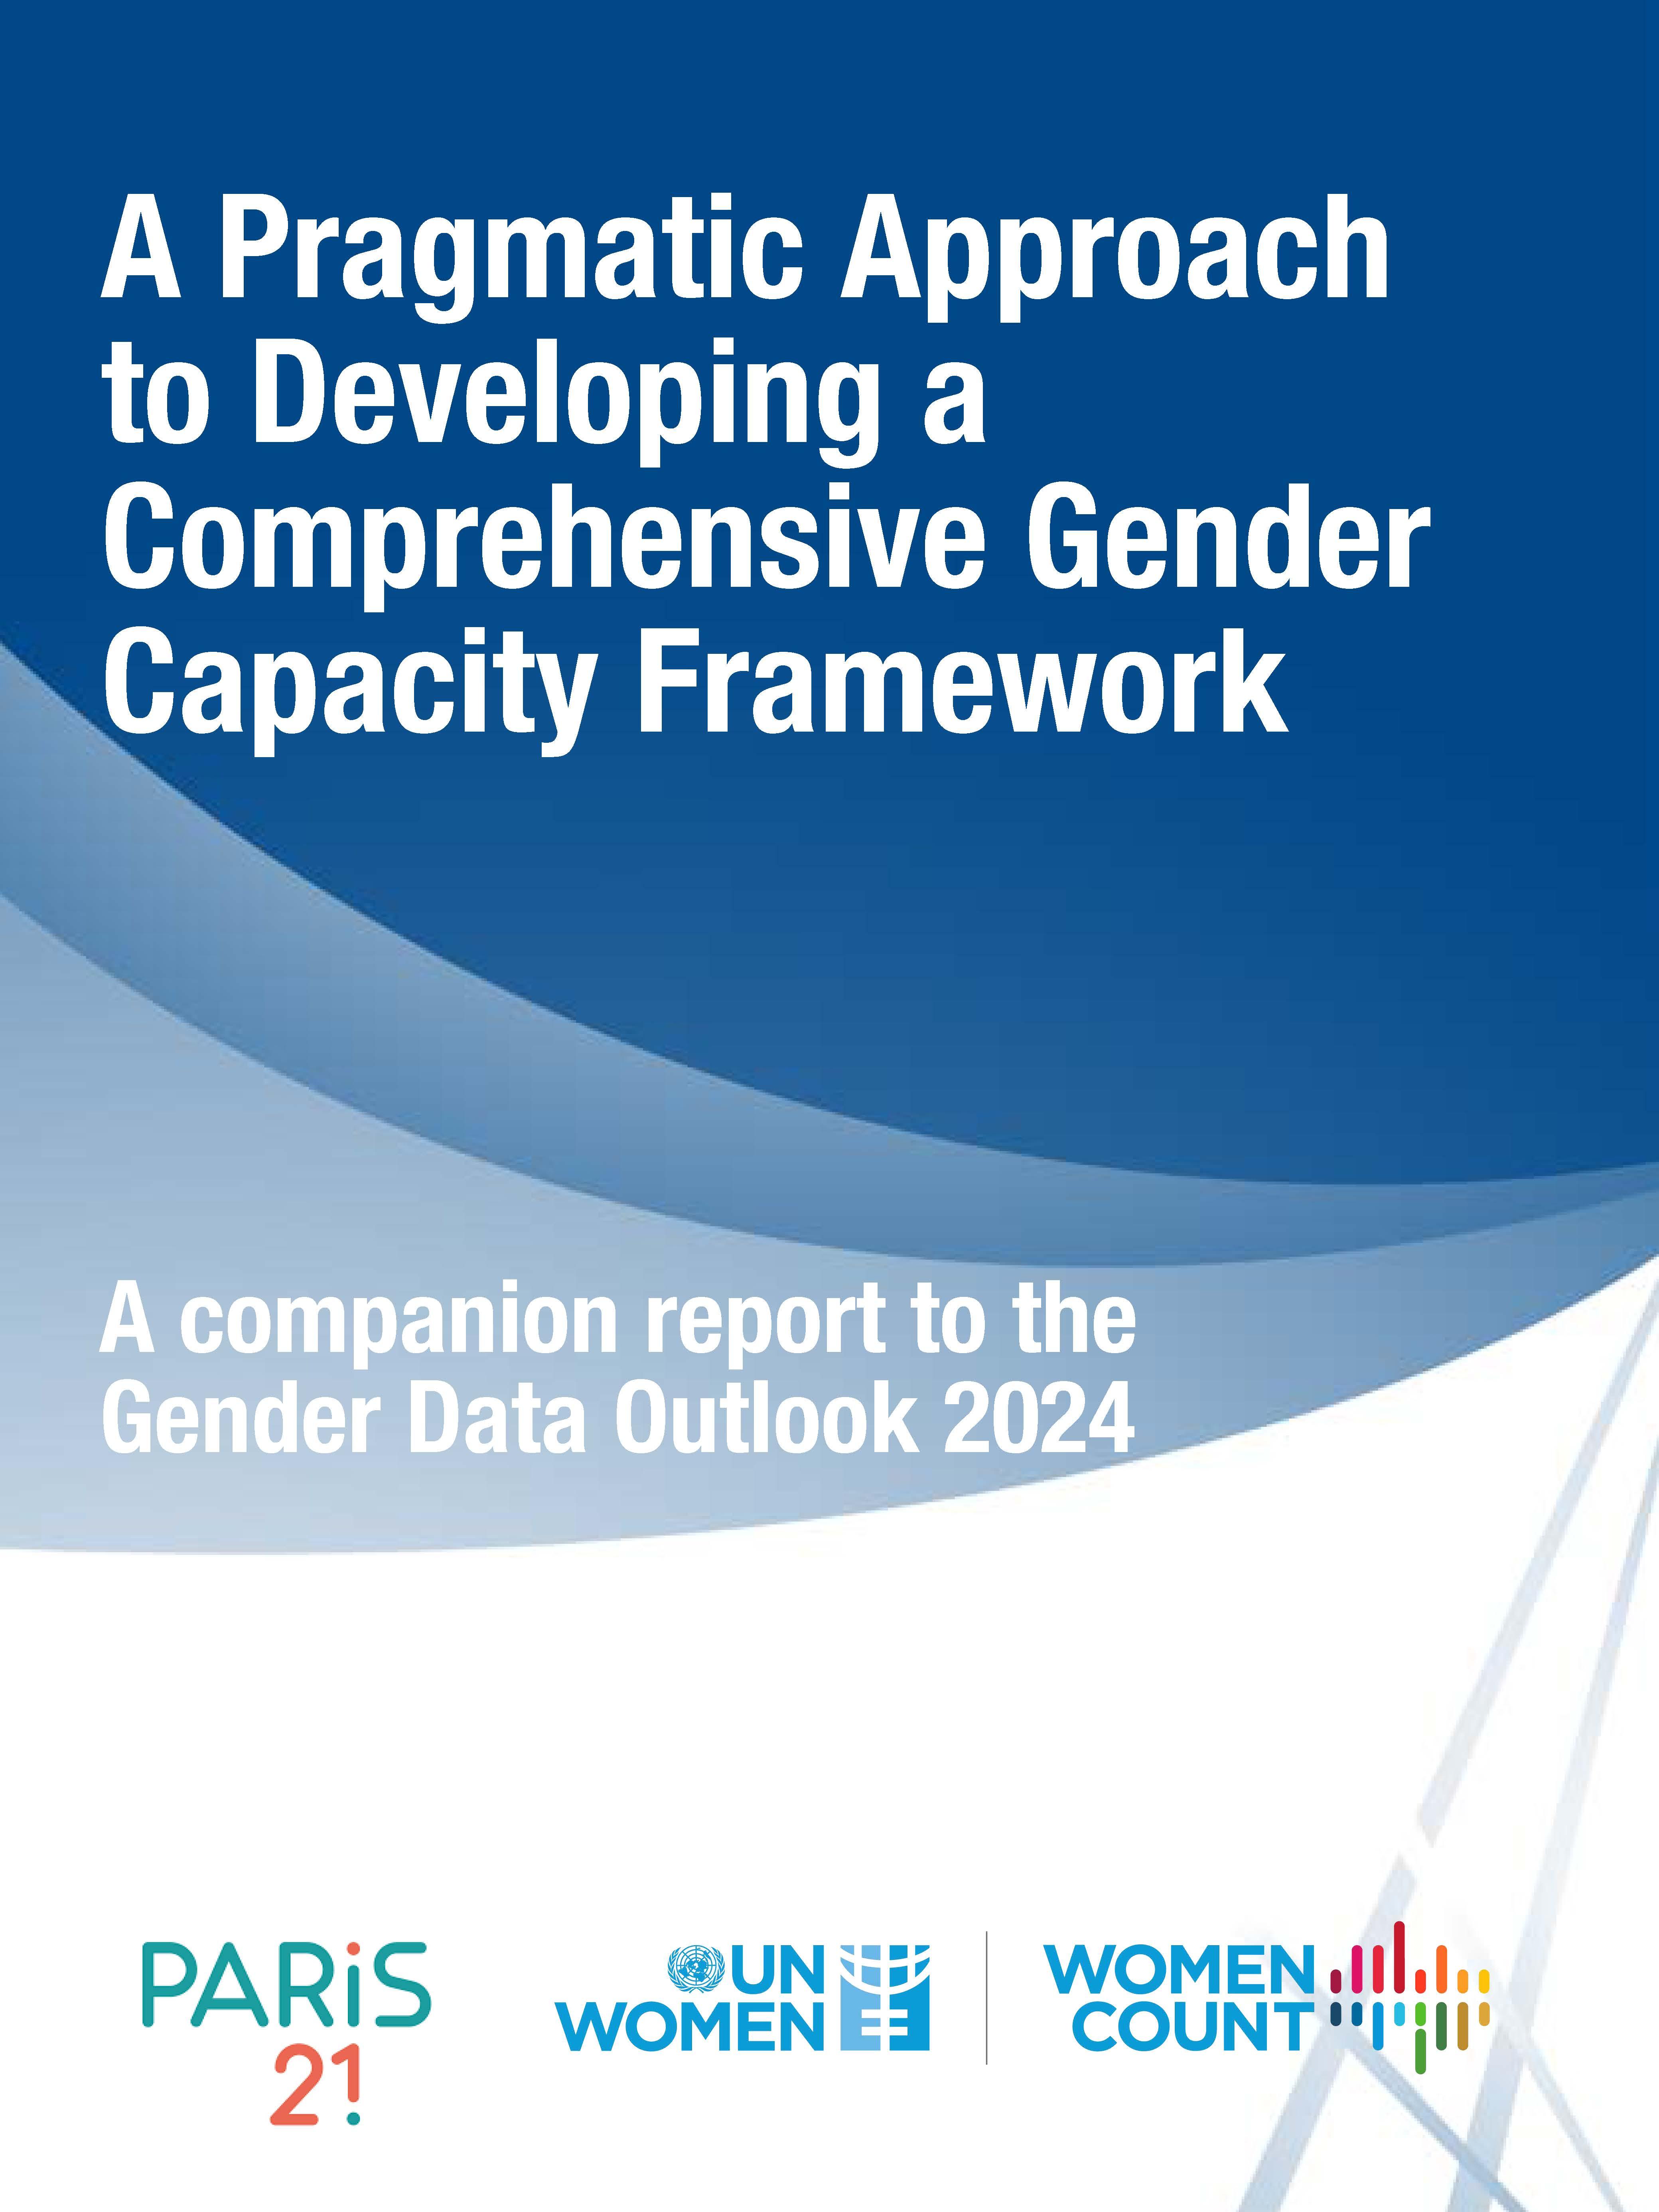 A Pragmatic Approach to Developing a Comprehensive Gender Capacity Framework: A Companion Report to the Gender Data Outlook 2024